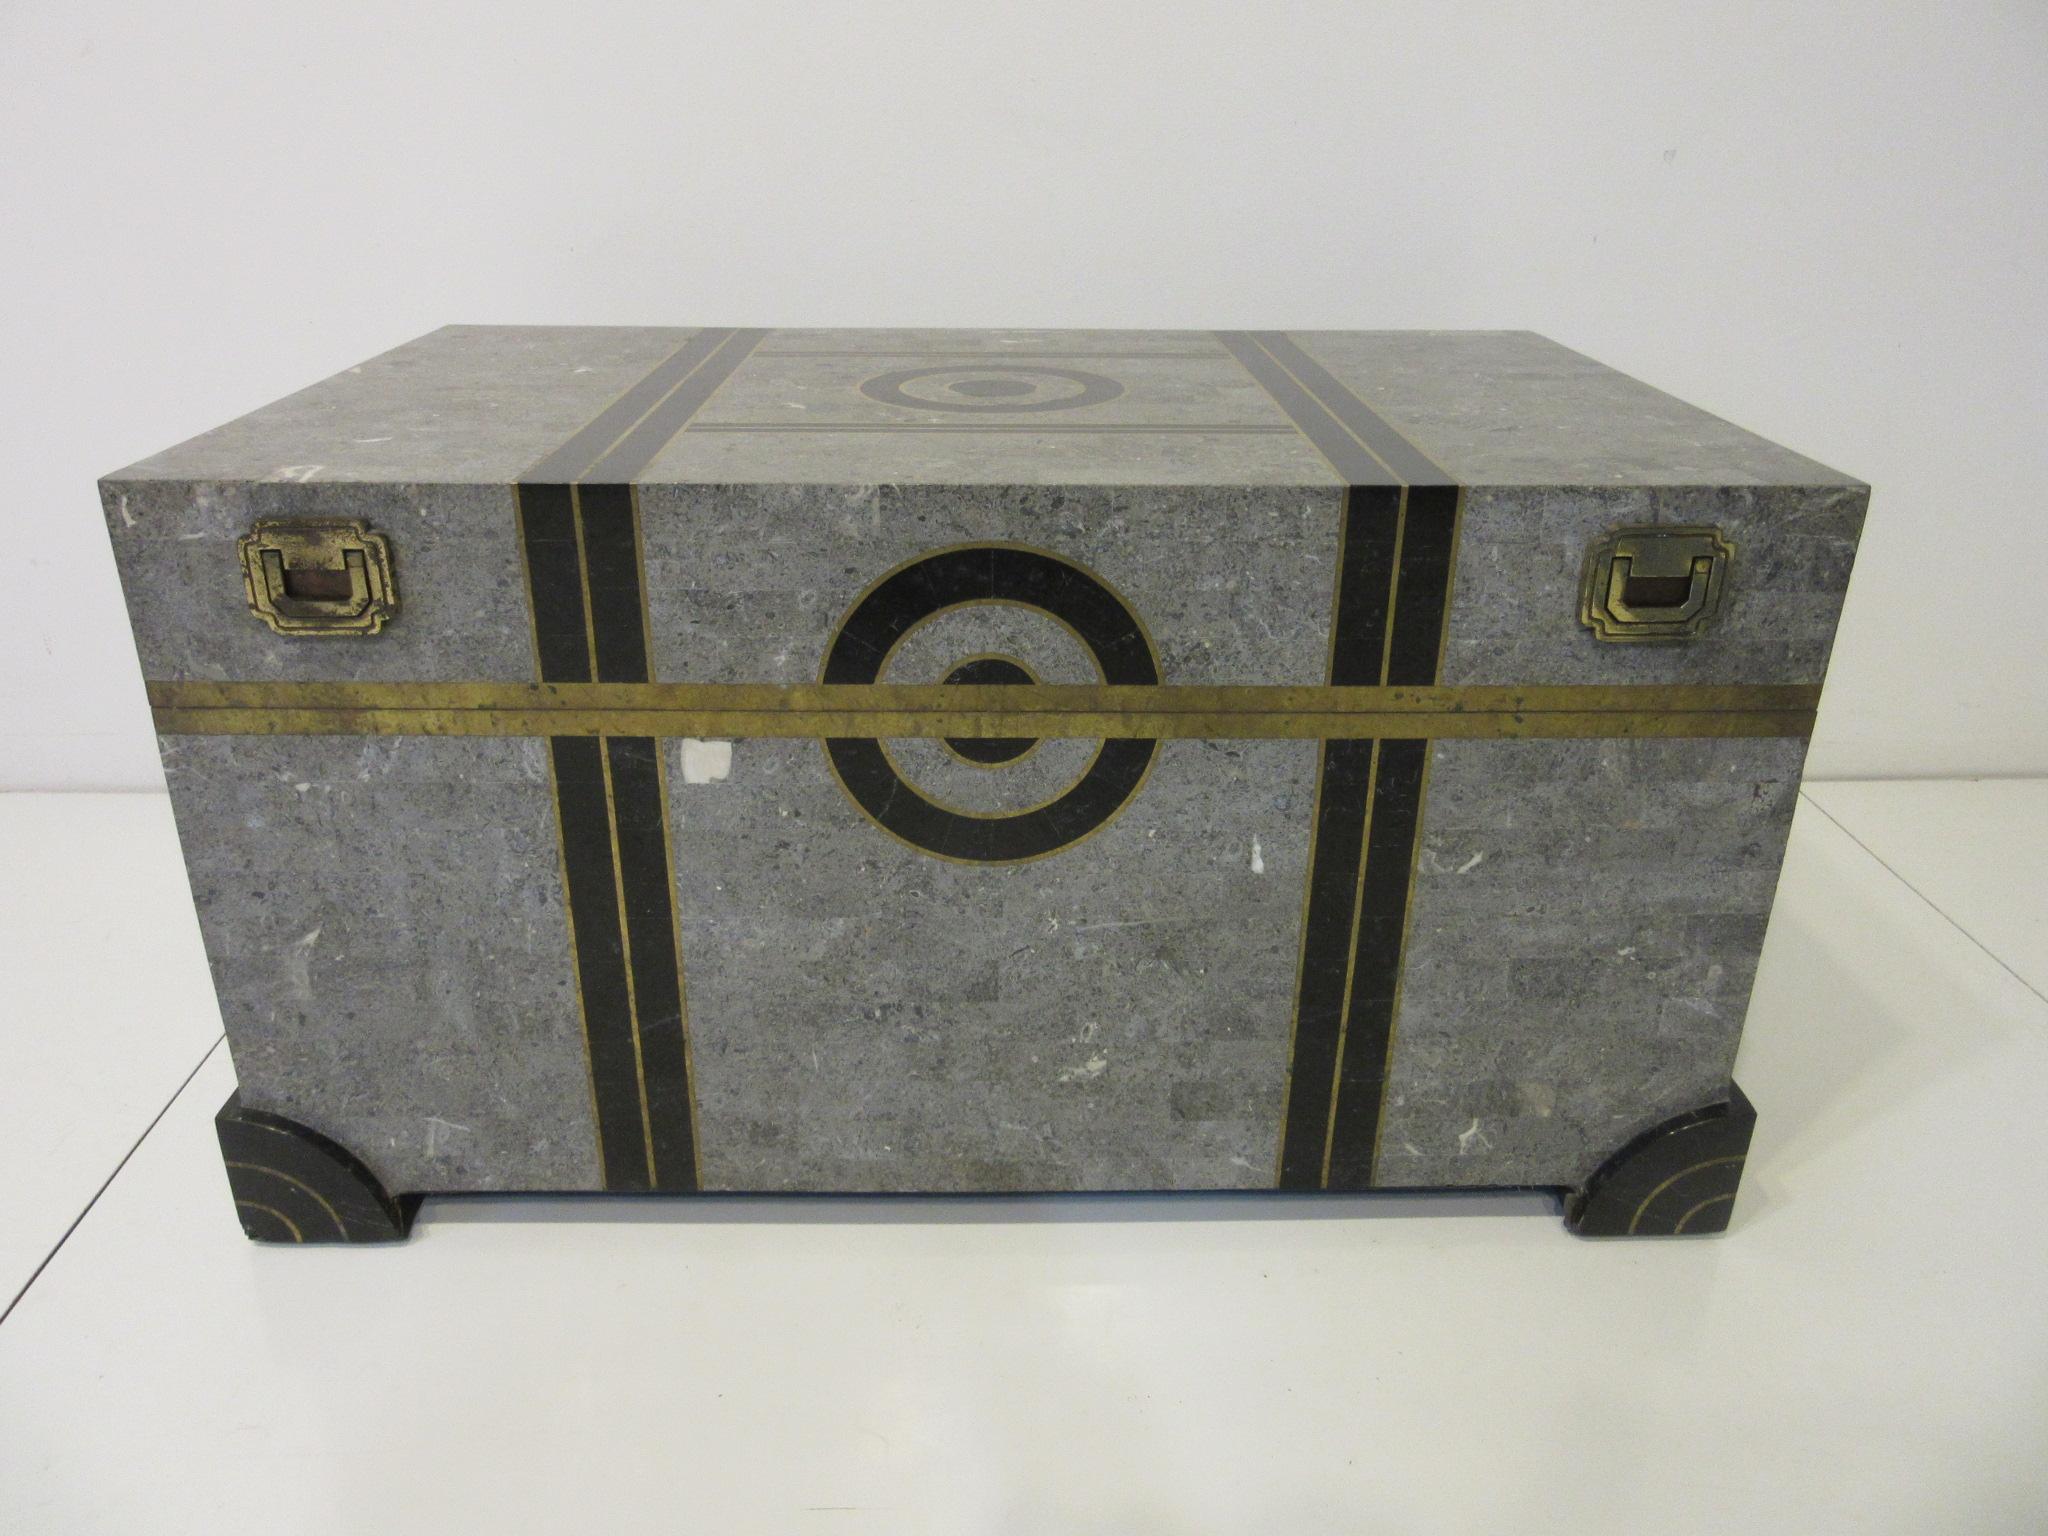 A well-crafted tessellated marble coffee table chest with gray, charcoal, mixed marble and inlay brass details to all sides. The inside is covered in a tight black velvet styled material as well as the bottom of the chest, the hinges and handles are